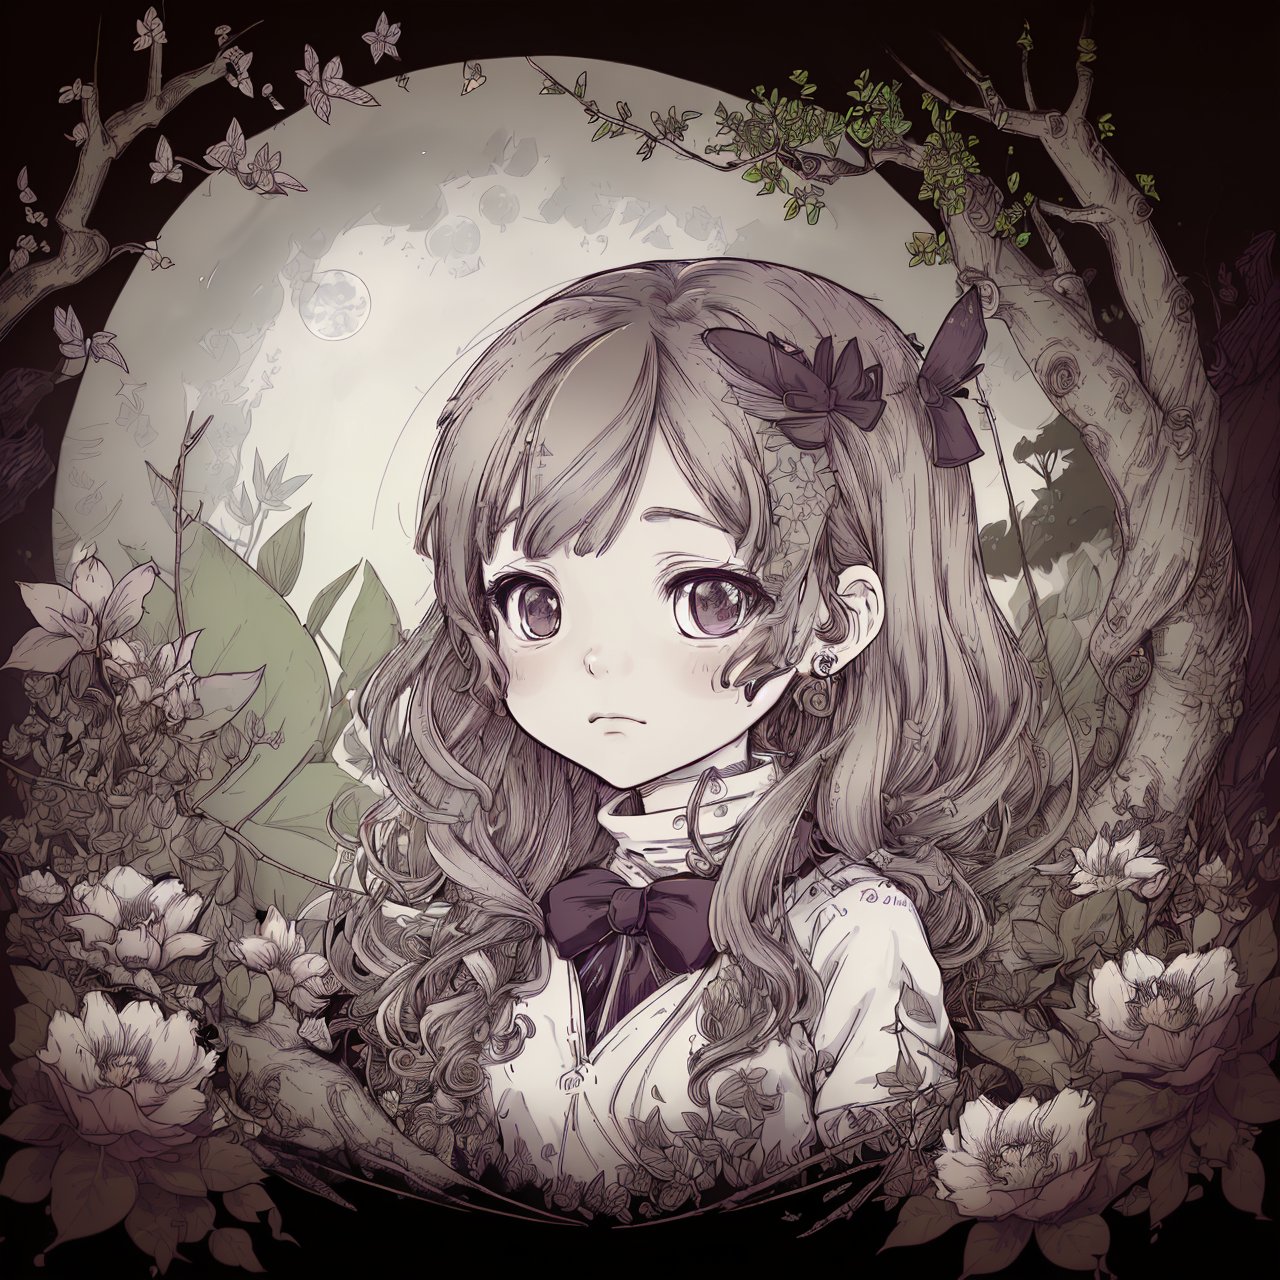 Hq subdued finelines drawing , a chibi girl potrait ,64k, depth of field ,  by foliage and flowers and branch and tree,full moon in the distance,  butterflies, xewx